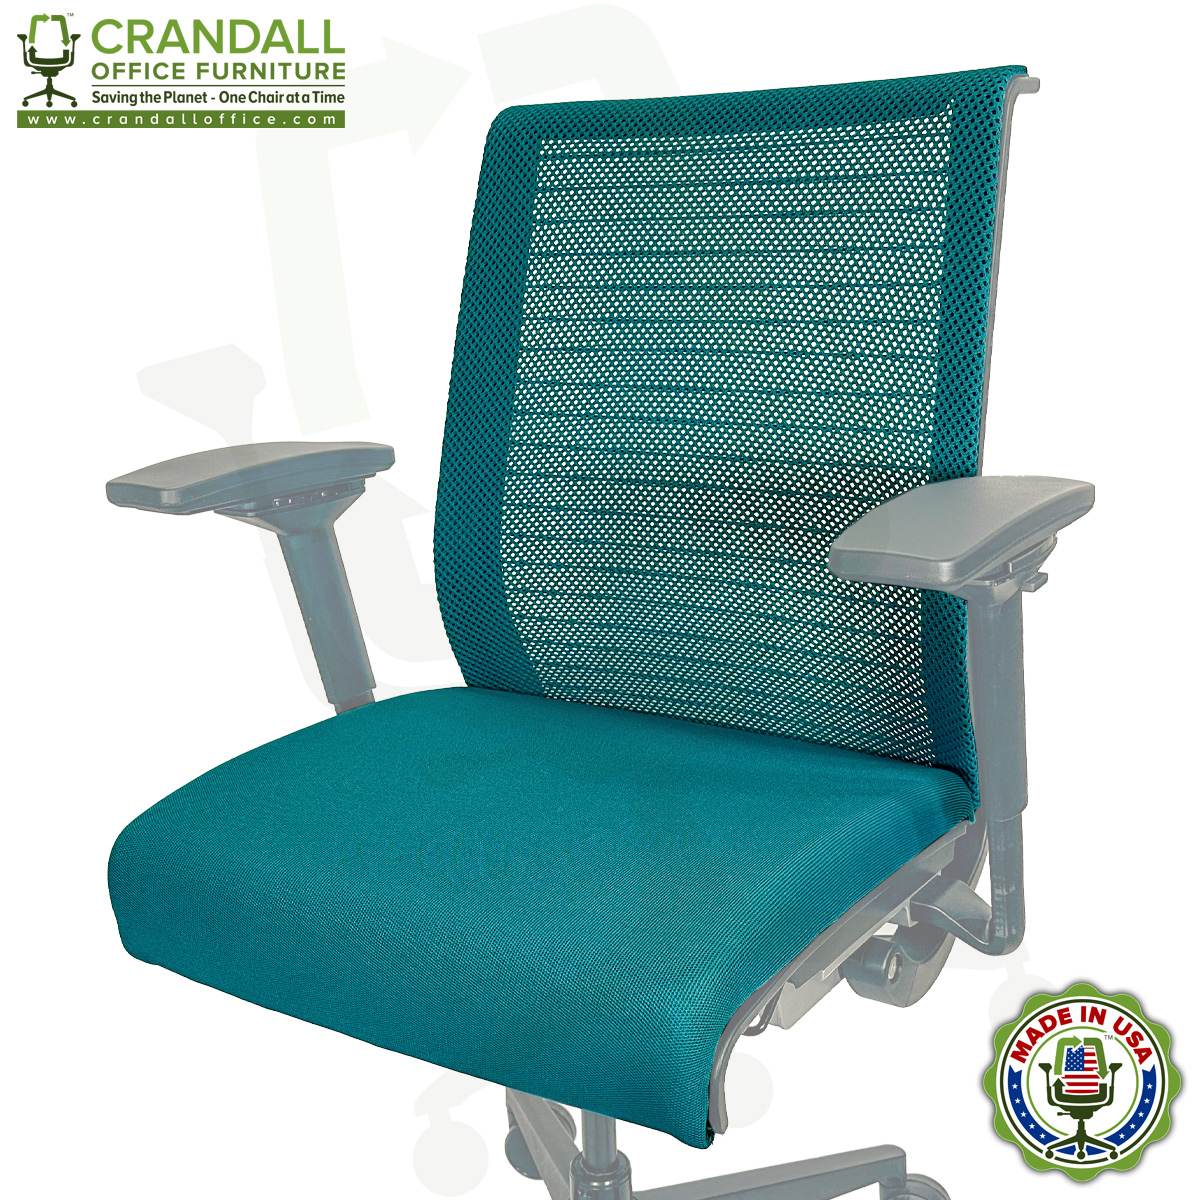 https://www.crandalloffice.com/wp-content/uploads/2023/05/Steelcase-V1-Think-Chair-Upholstery-by-Crandall-Office-Furniture.jpg